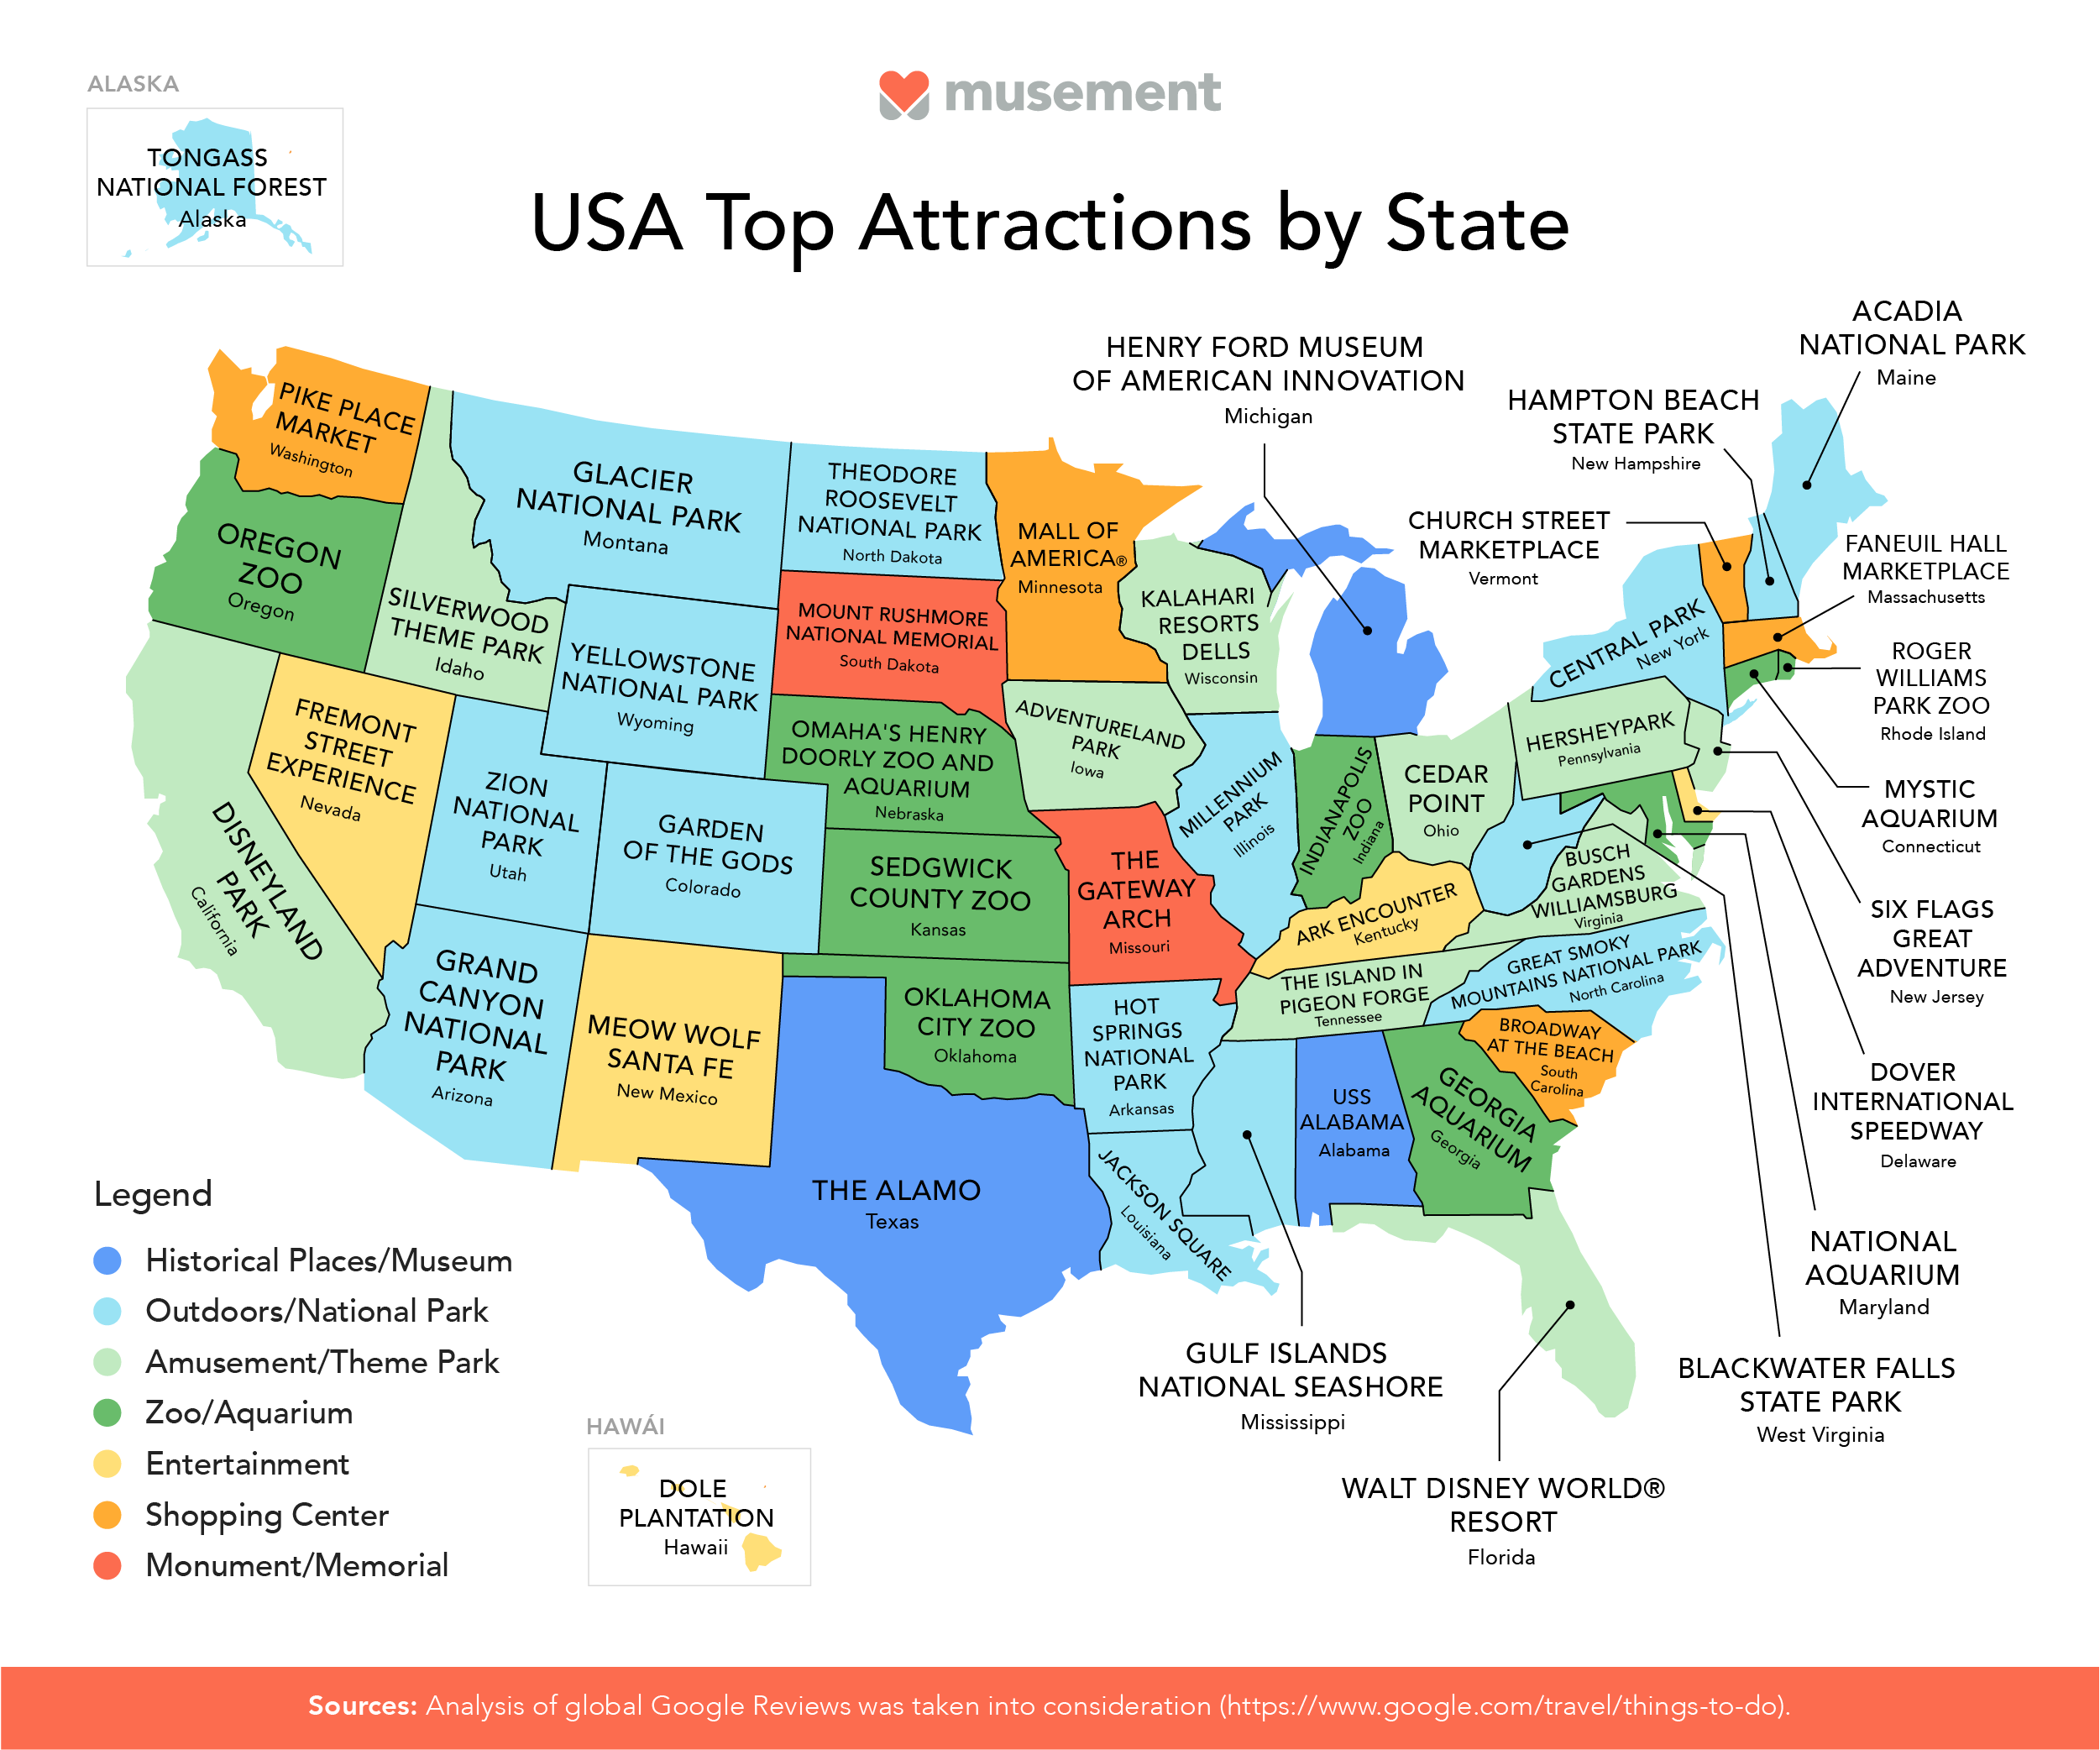 USA Top Attractions by State